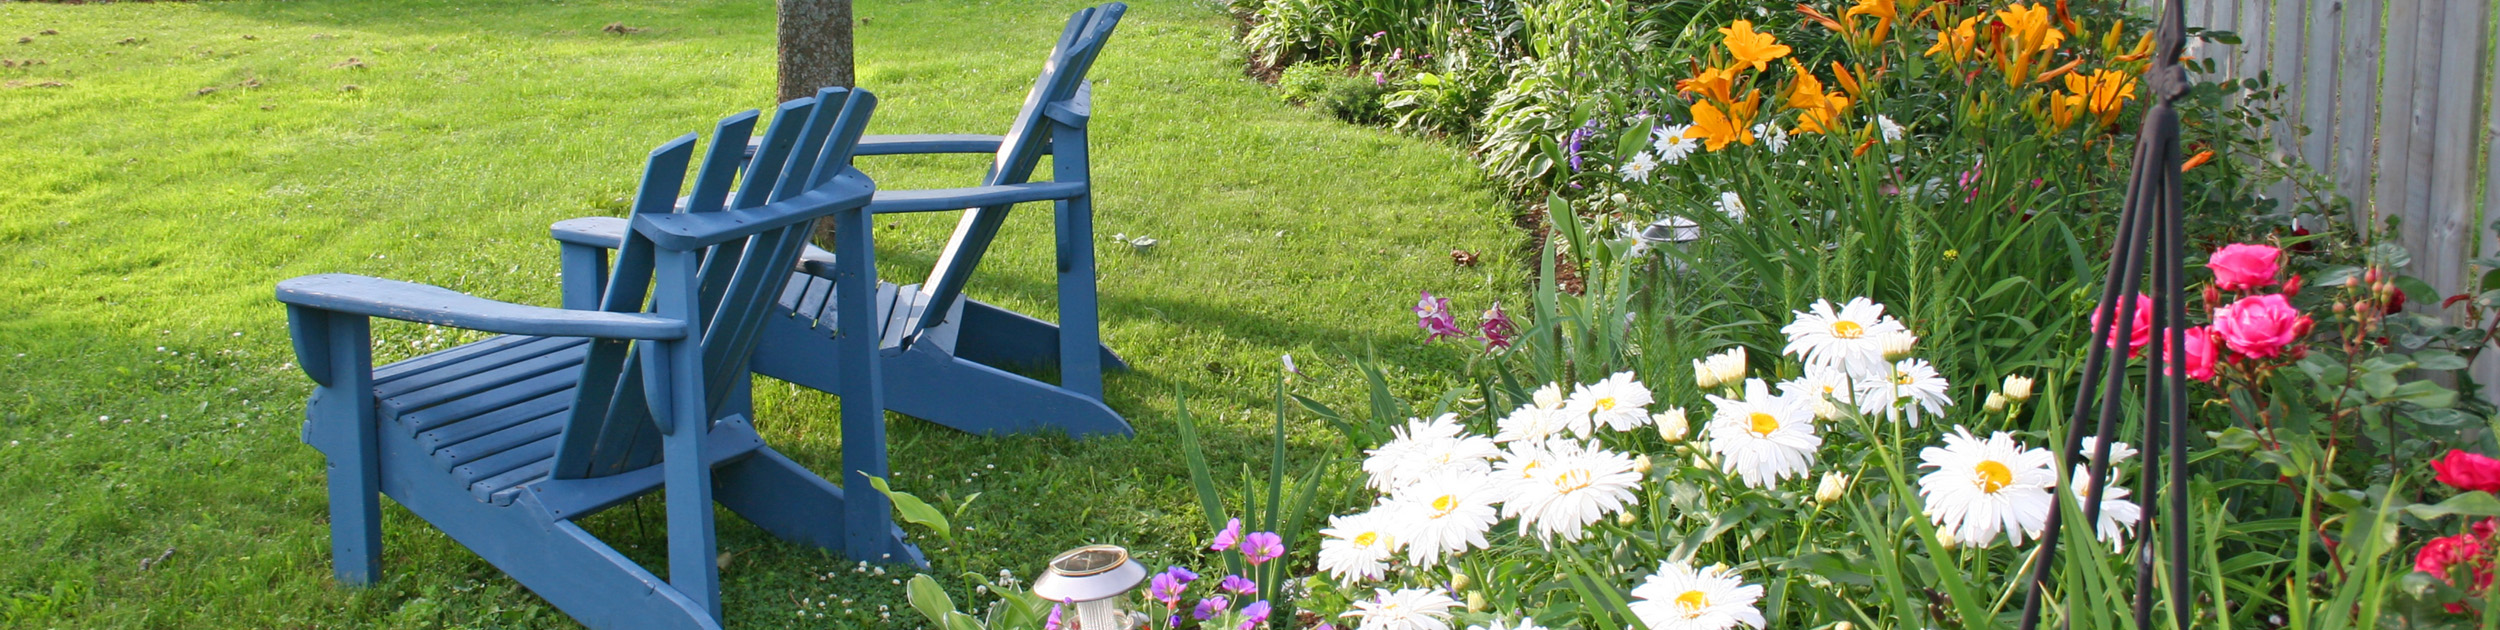 two empty blue adirondack chairs sitting upon a luscious green lawn and surrounded by beautiful daisies and other flowers on a sunny day